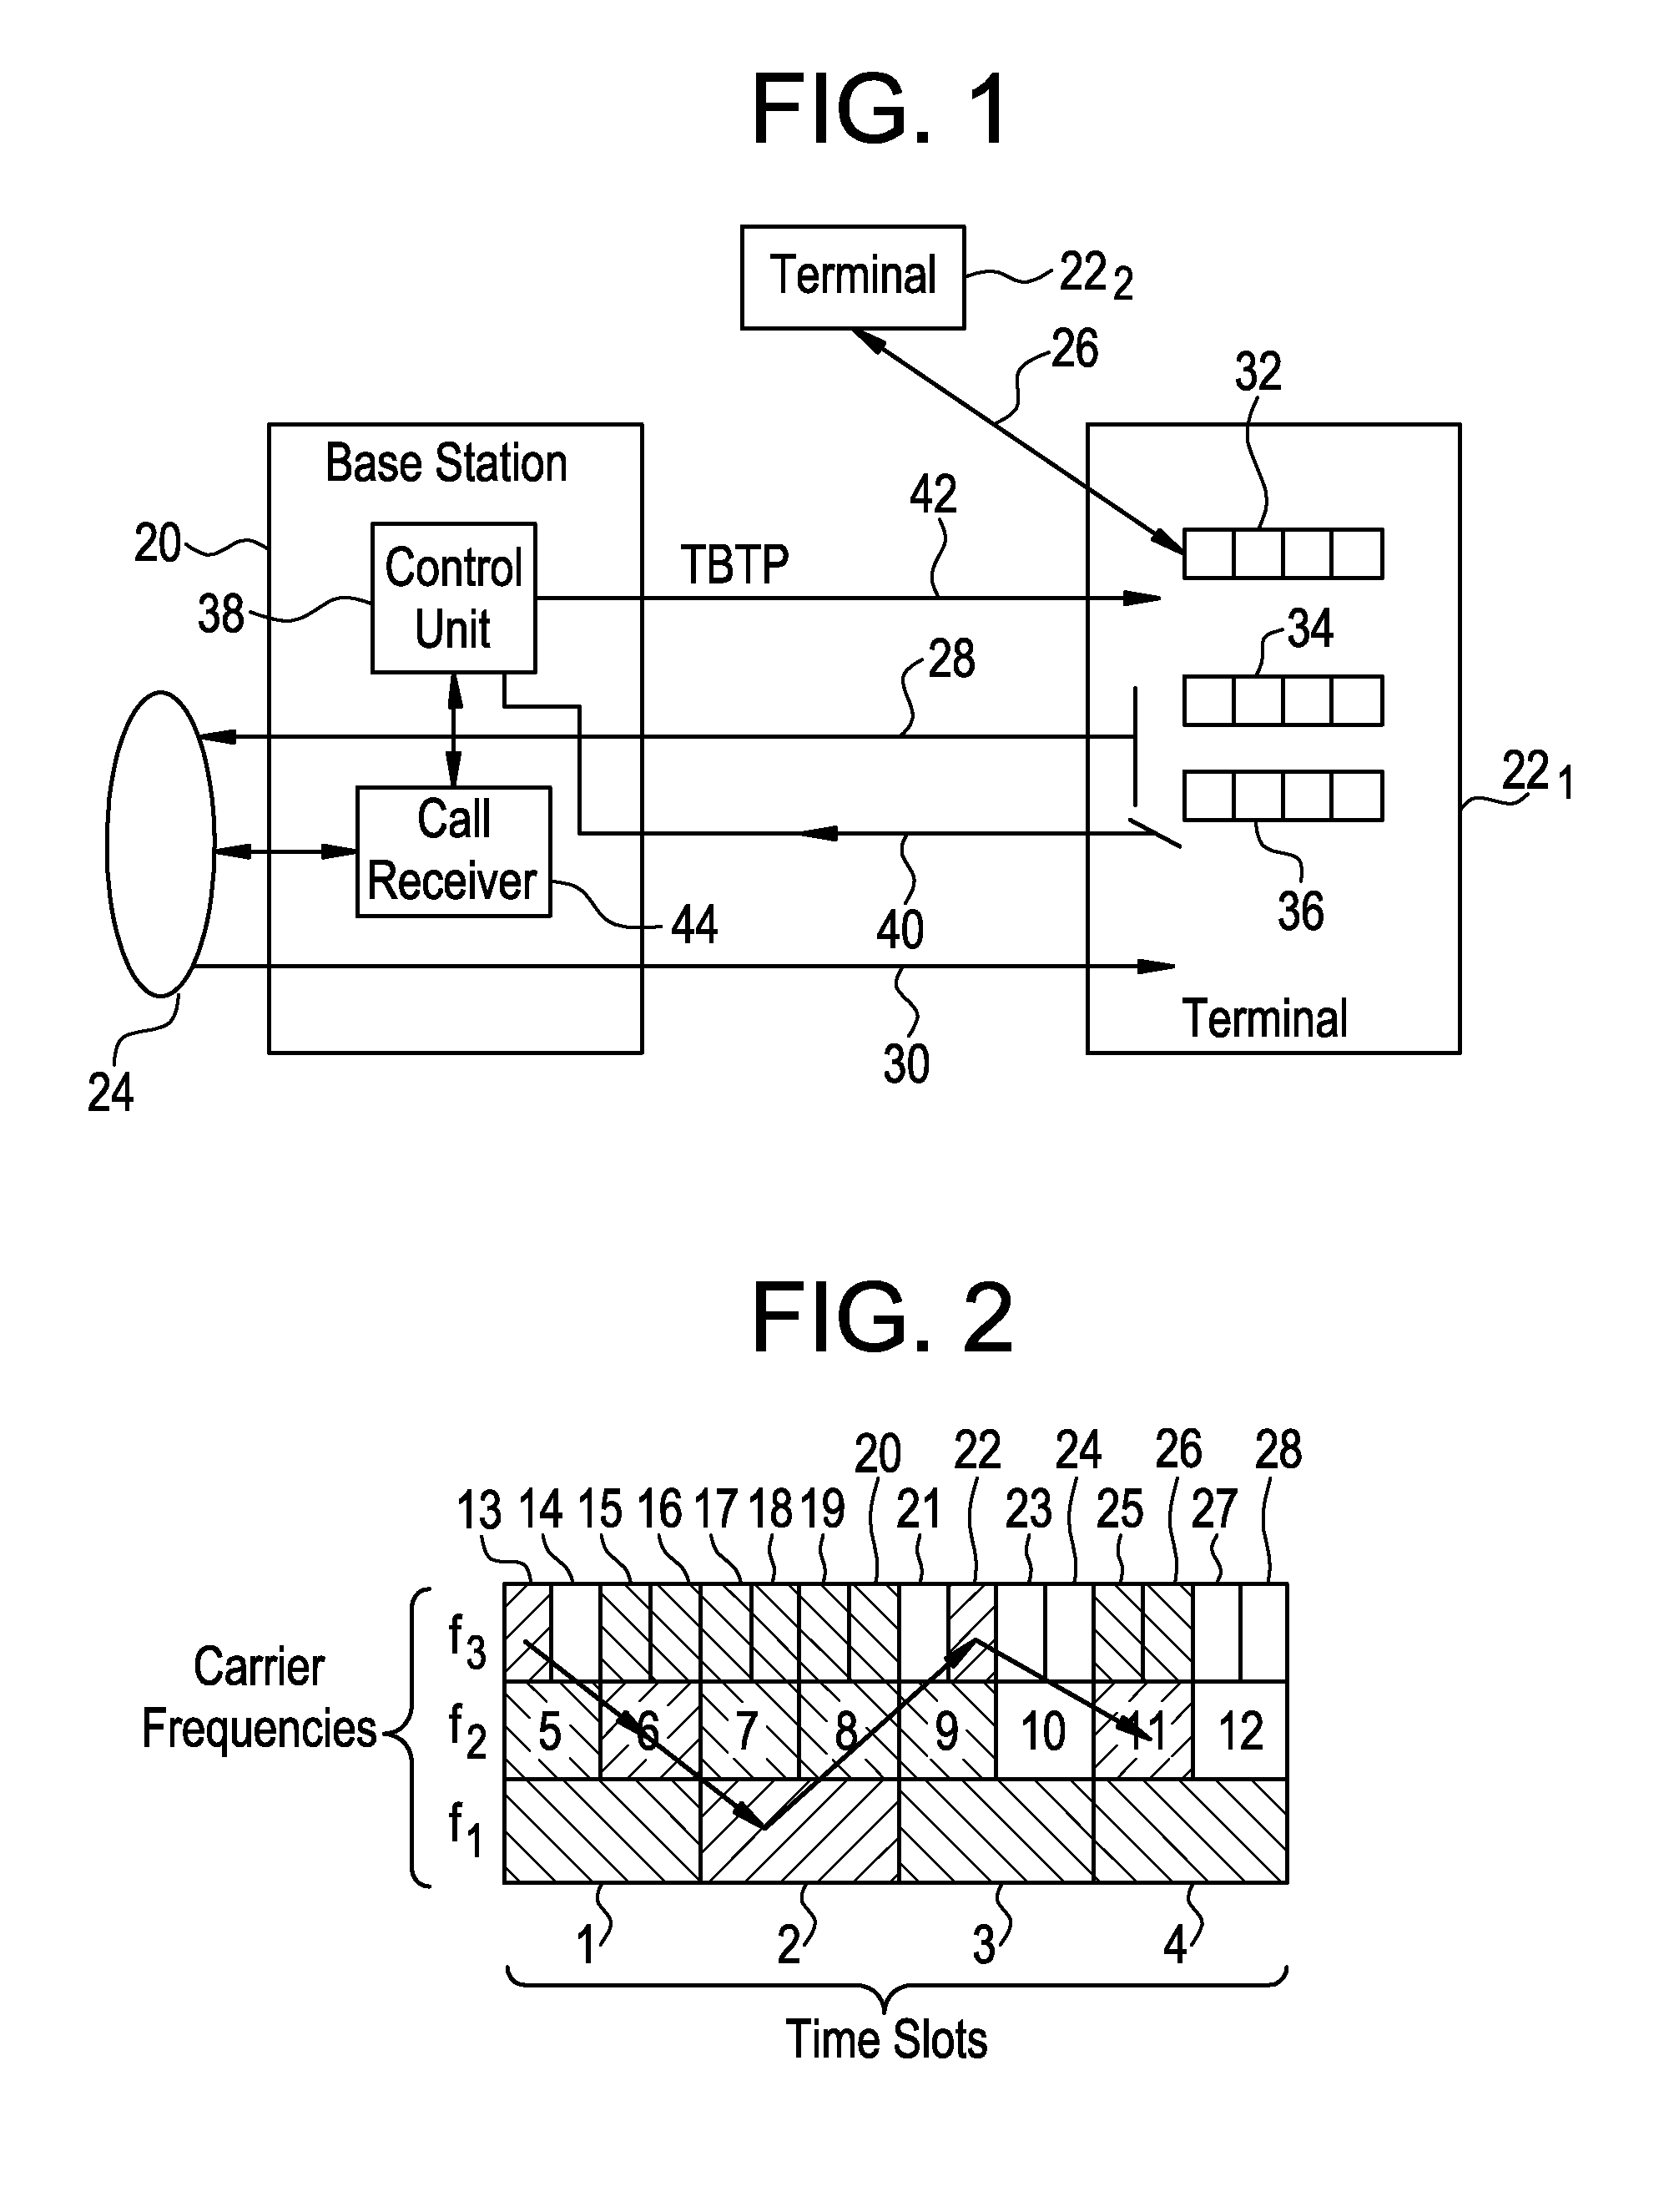 Method of allocating communication resources in an MF-TDMA telecommunication system